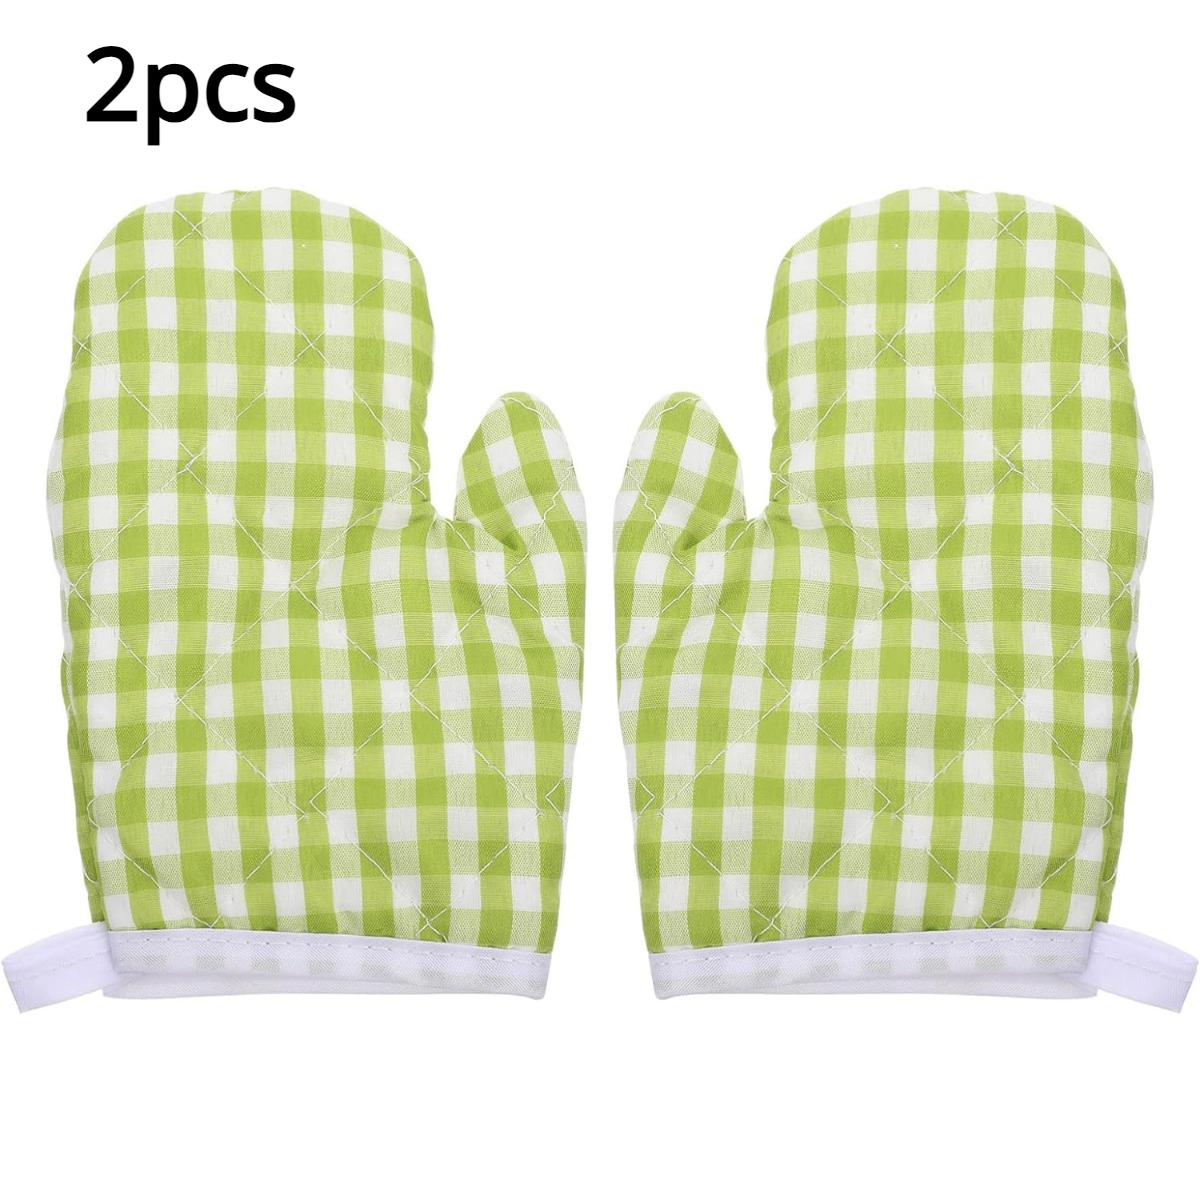 Kids Oven Mitts For Children Play, Kitchen, Microwave Oven Gloves